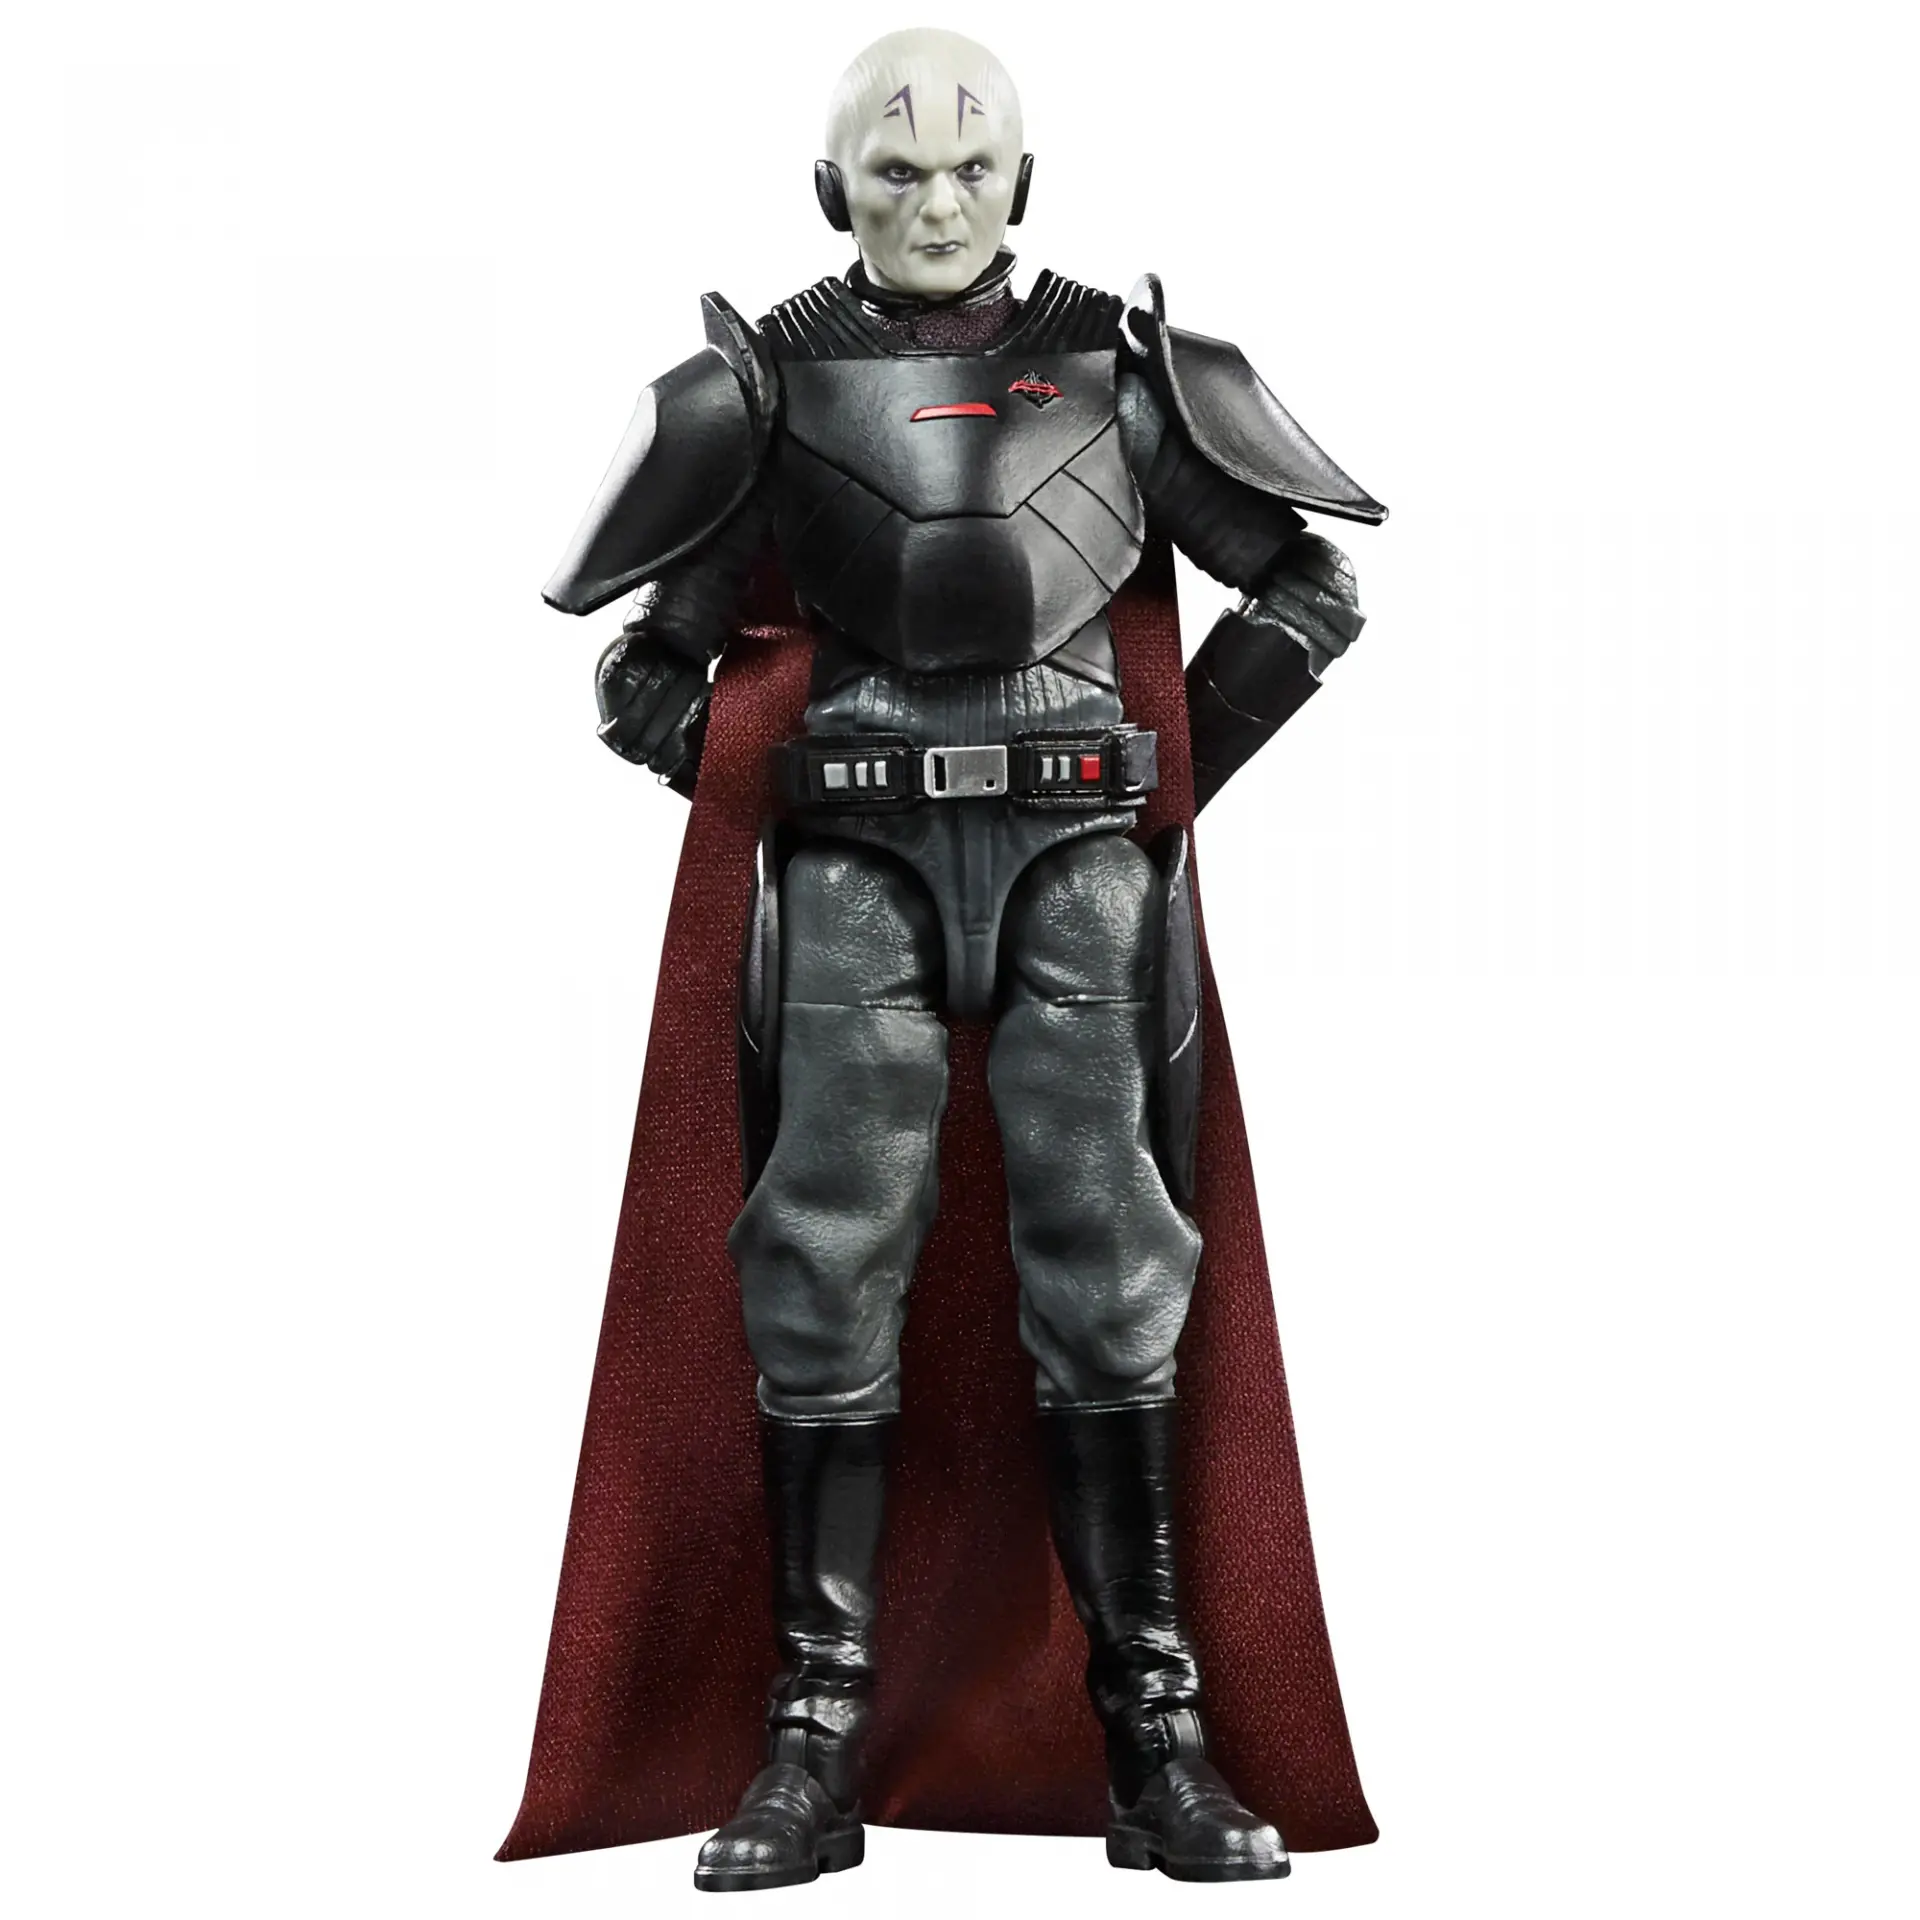 Star wars the black series grand inquisitor jawascave 11